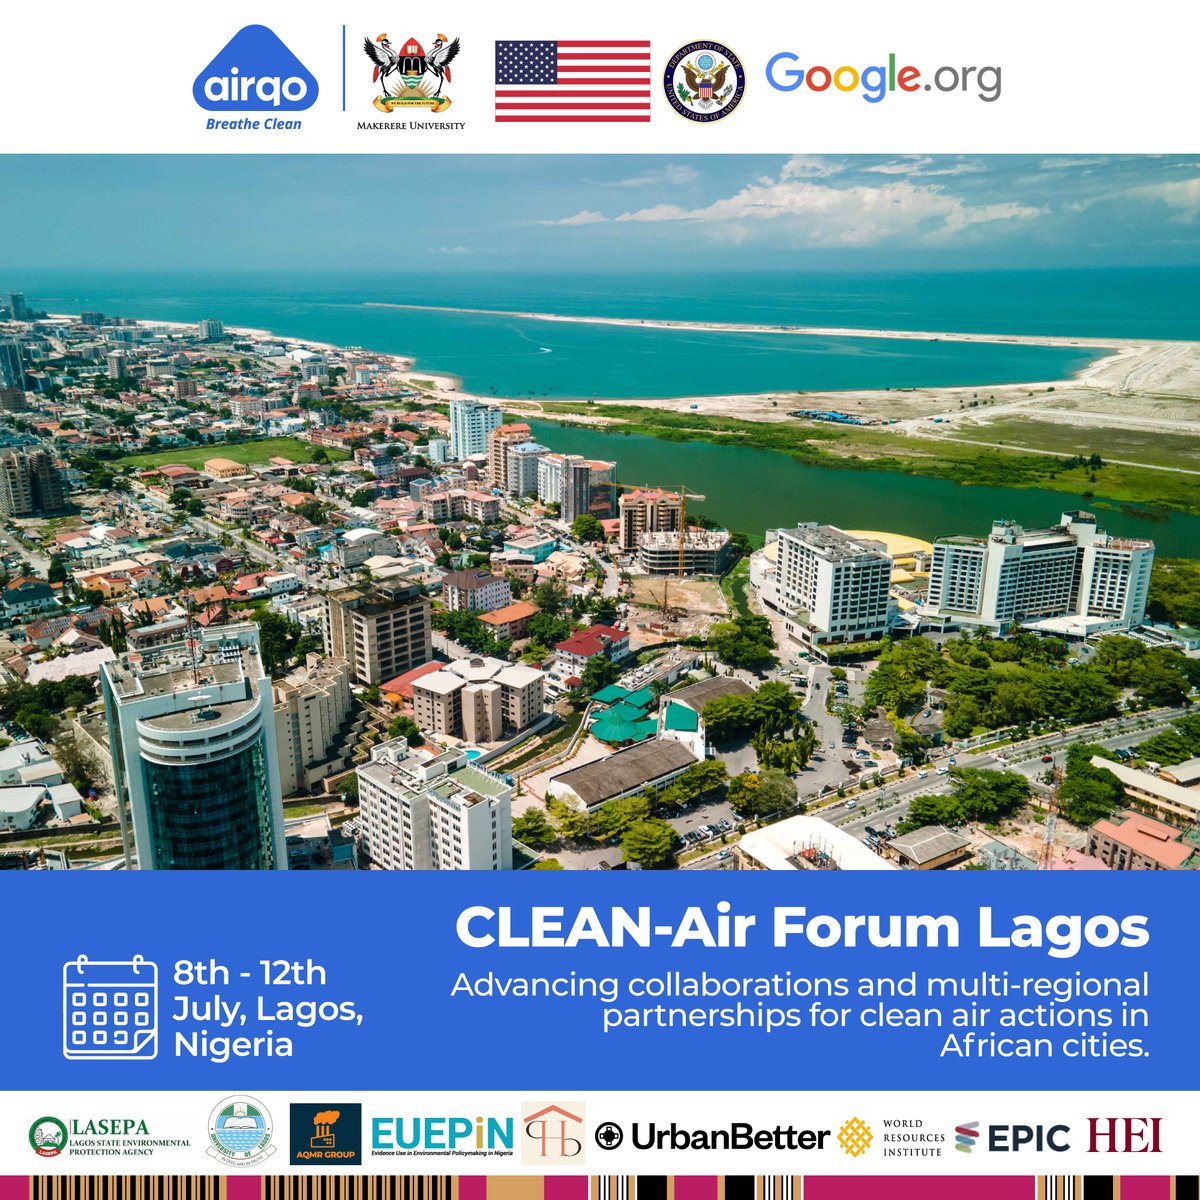 The #CleanAirForumLagos will bring together #AirQuality communities of practice to promote knowledge sharing & enhance regional collaboration for #AirQuality mgt in African cities while addressing topical issues for air quality in Africa. Learn more 🔗 bit.ly/4aLXIN5